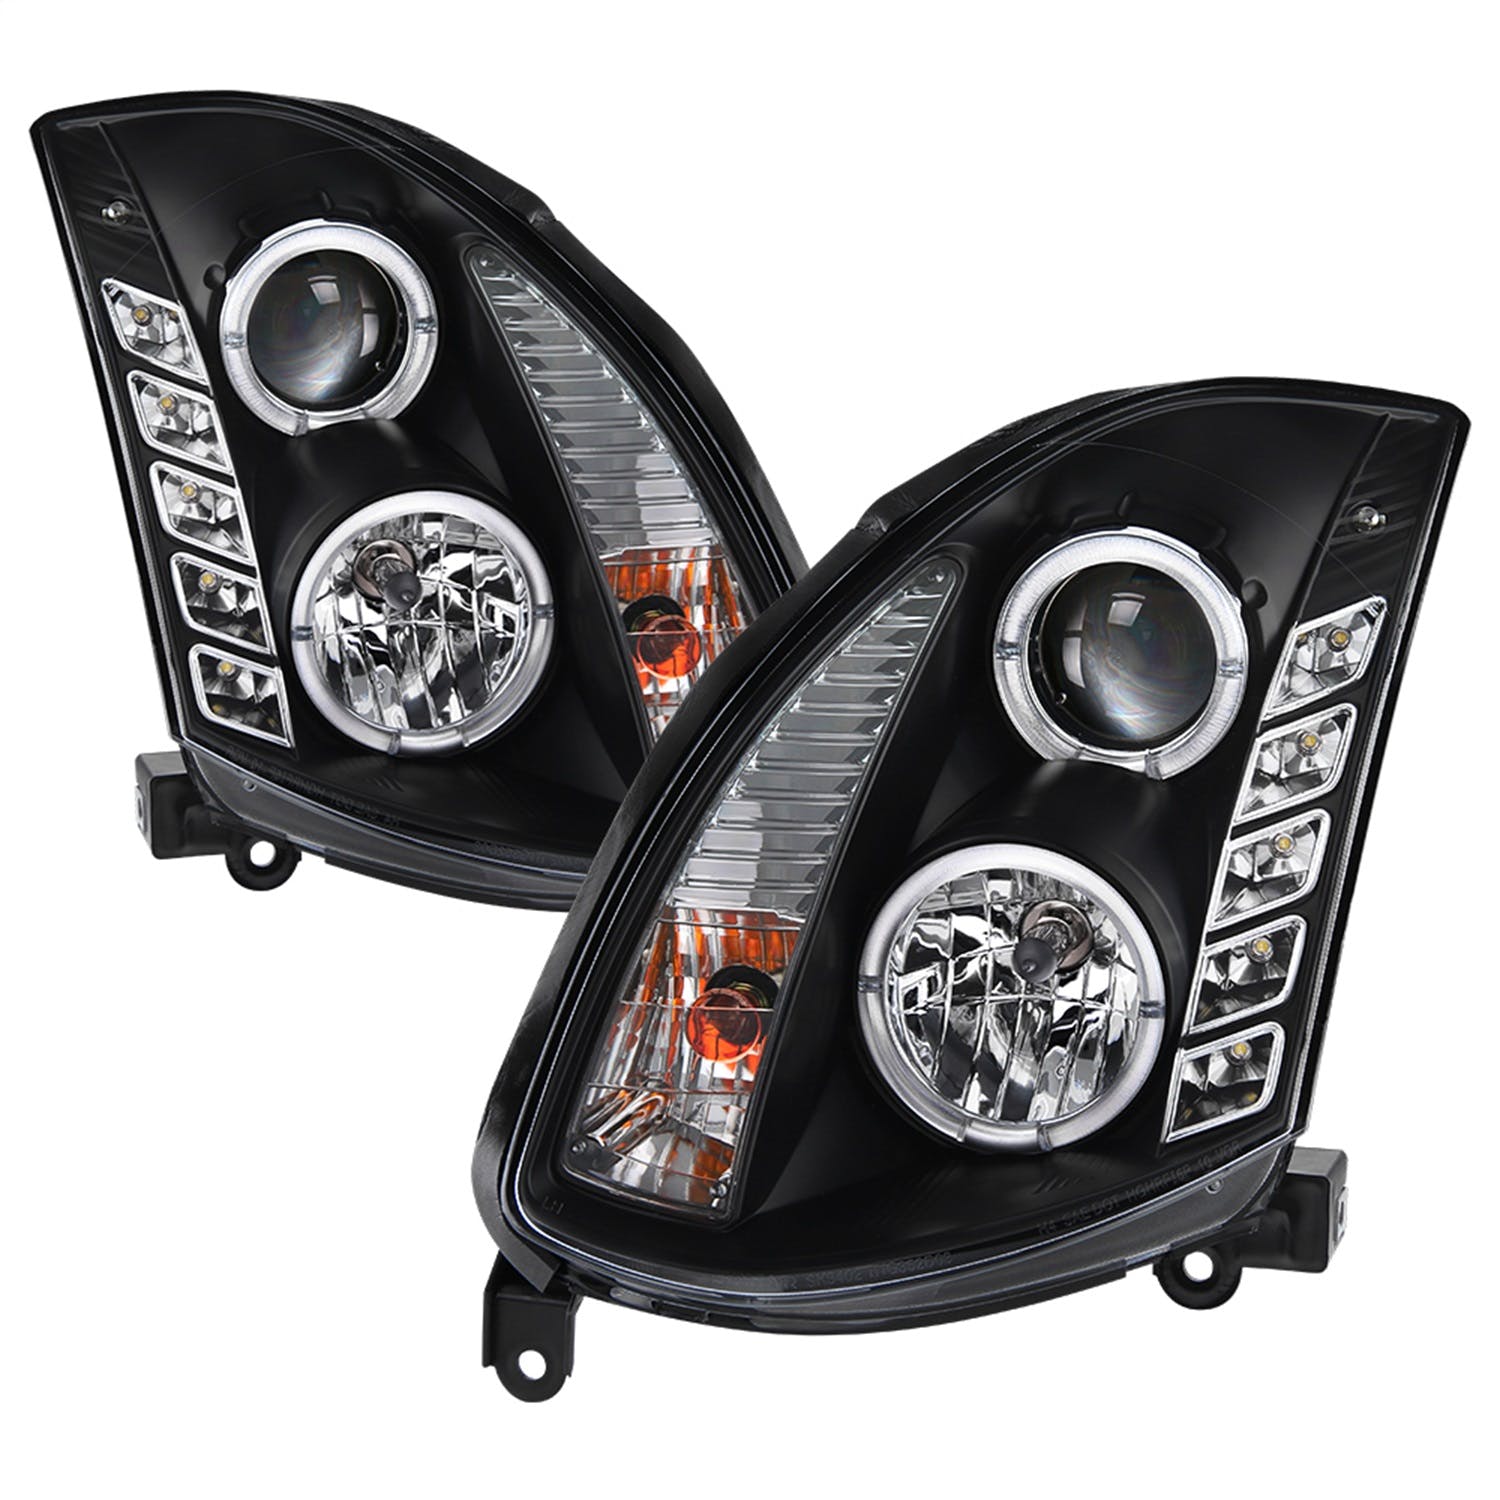 Spyder Auto 5011060 (Spyder) Infiniti G35 03-07 2DR Projector Headlights-Xenon/HID Model Only ( Not